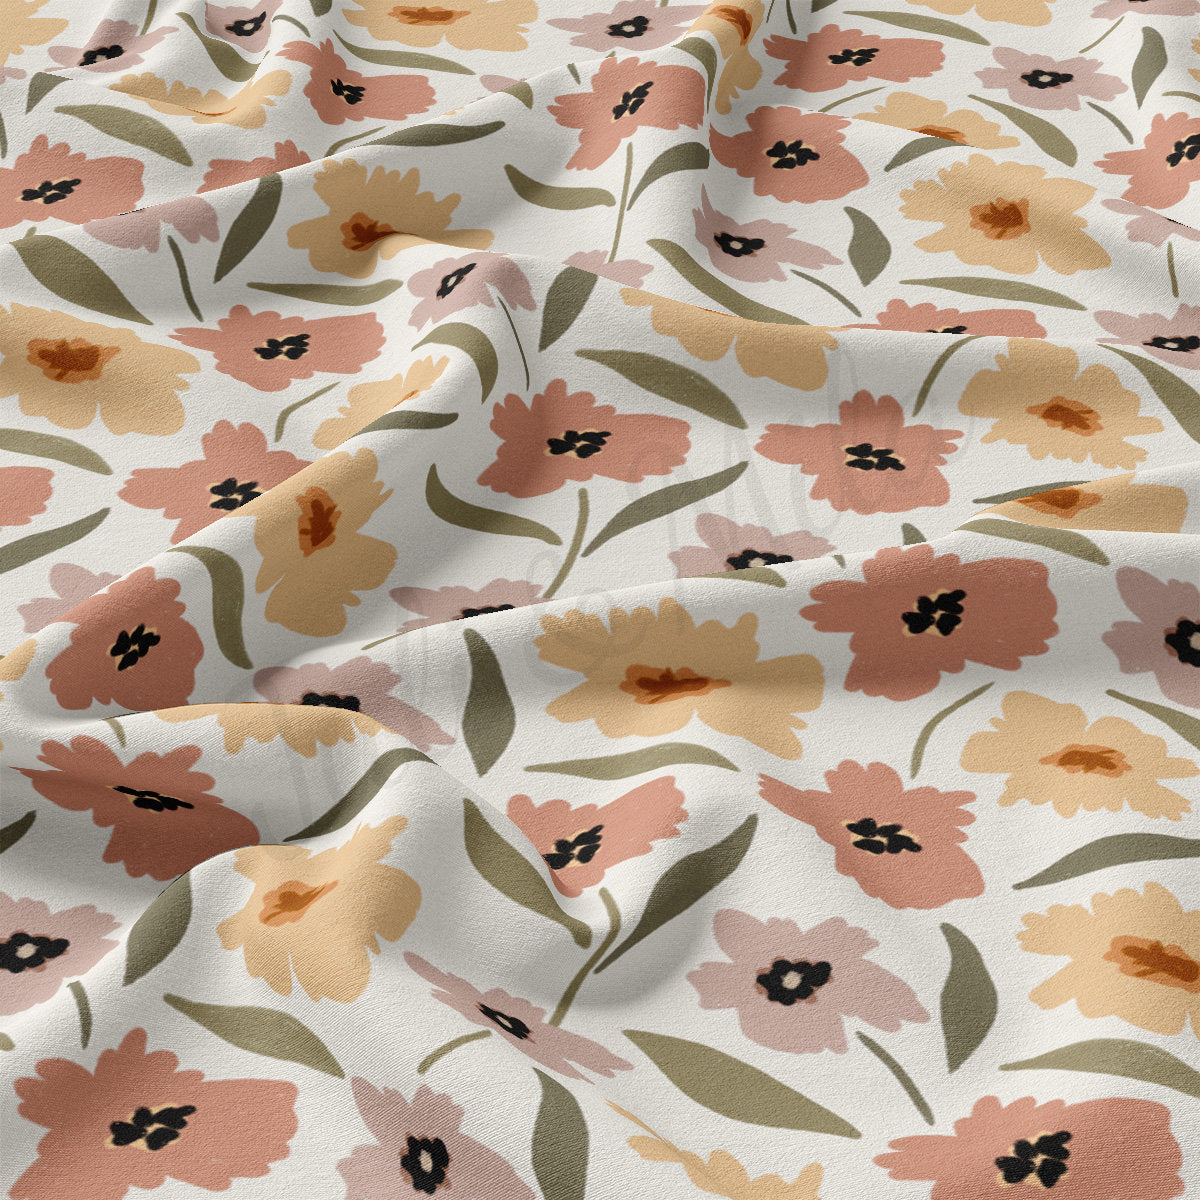 DBP Fabric Double Brushed Polyester DBP2560 Floral